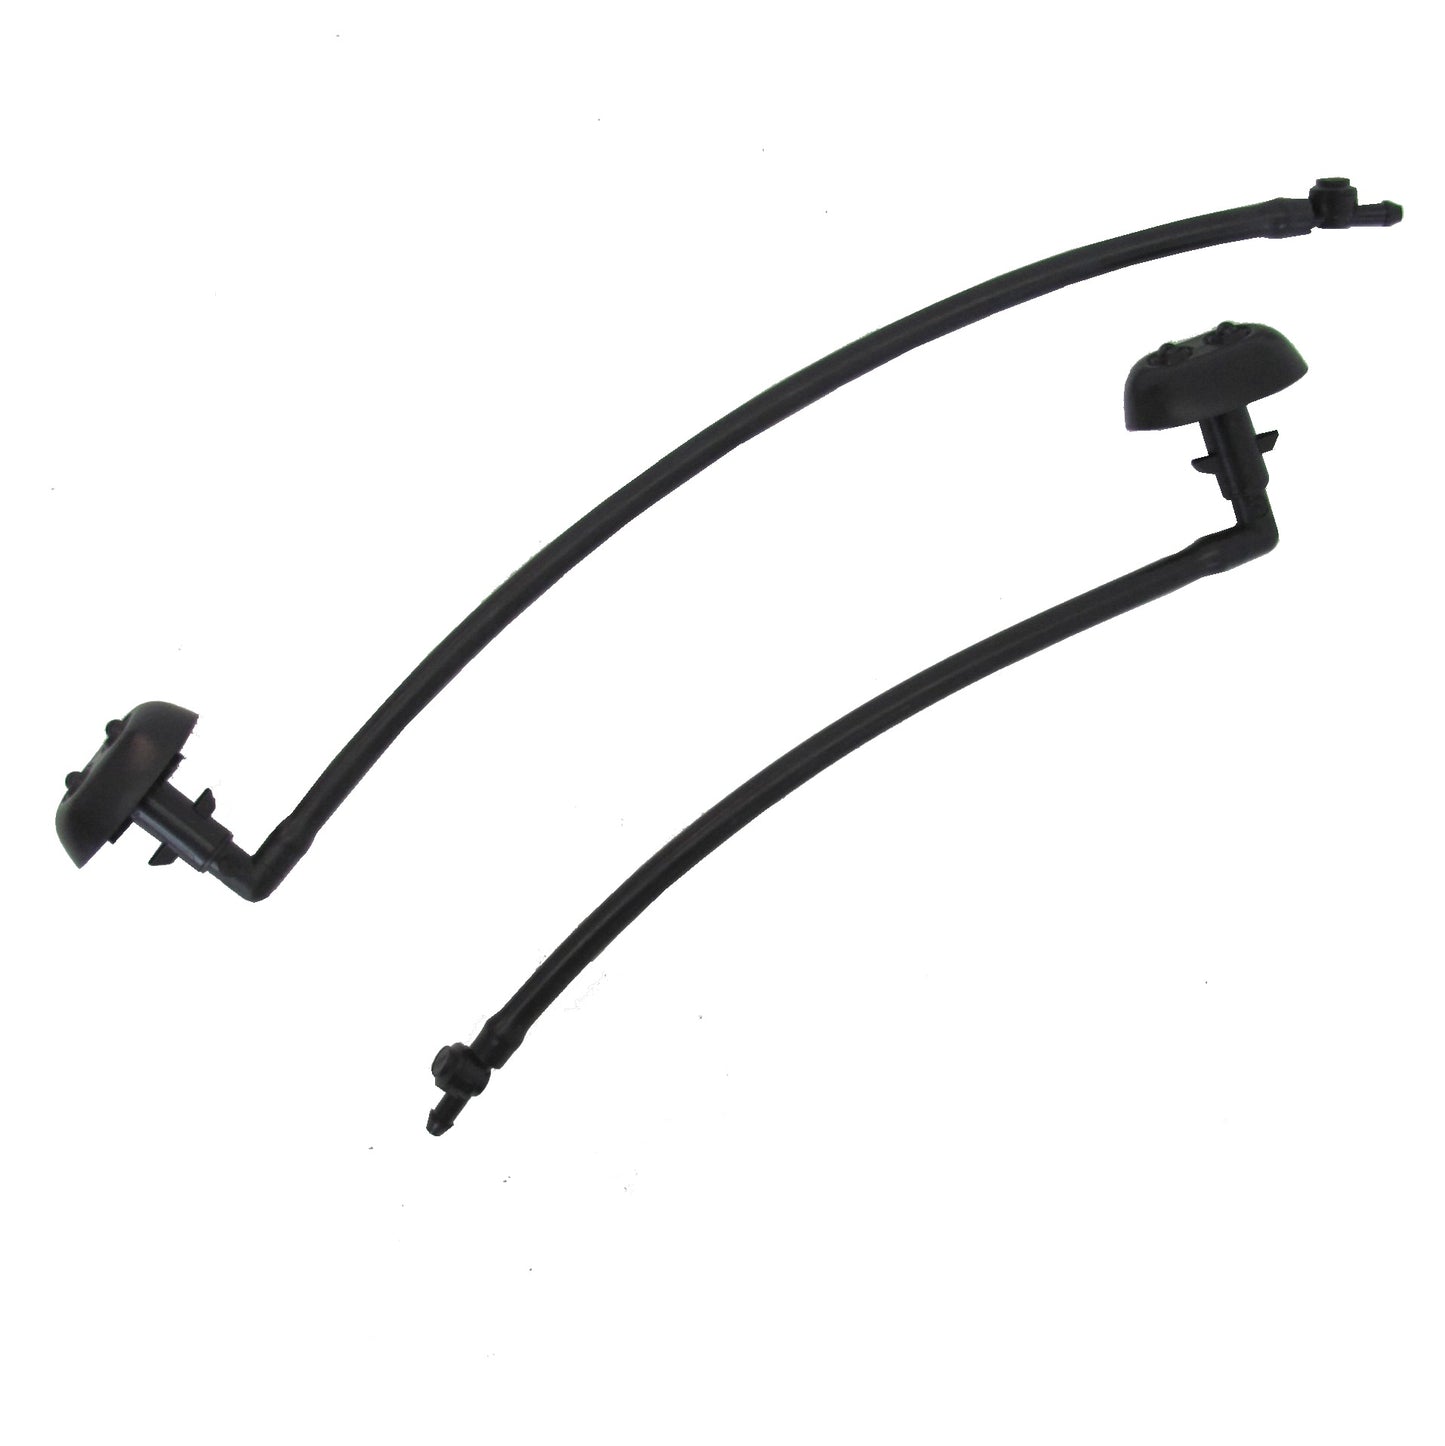 Front Bumper Washer Jets for Land Rover Discovery 4 2010 - 2013 (Pair)